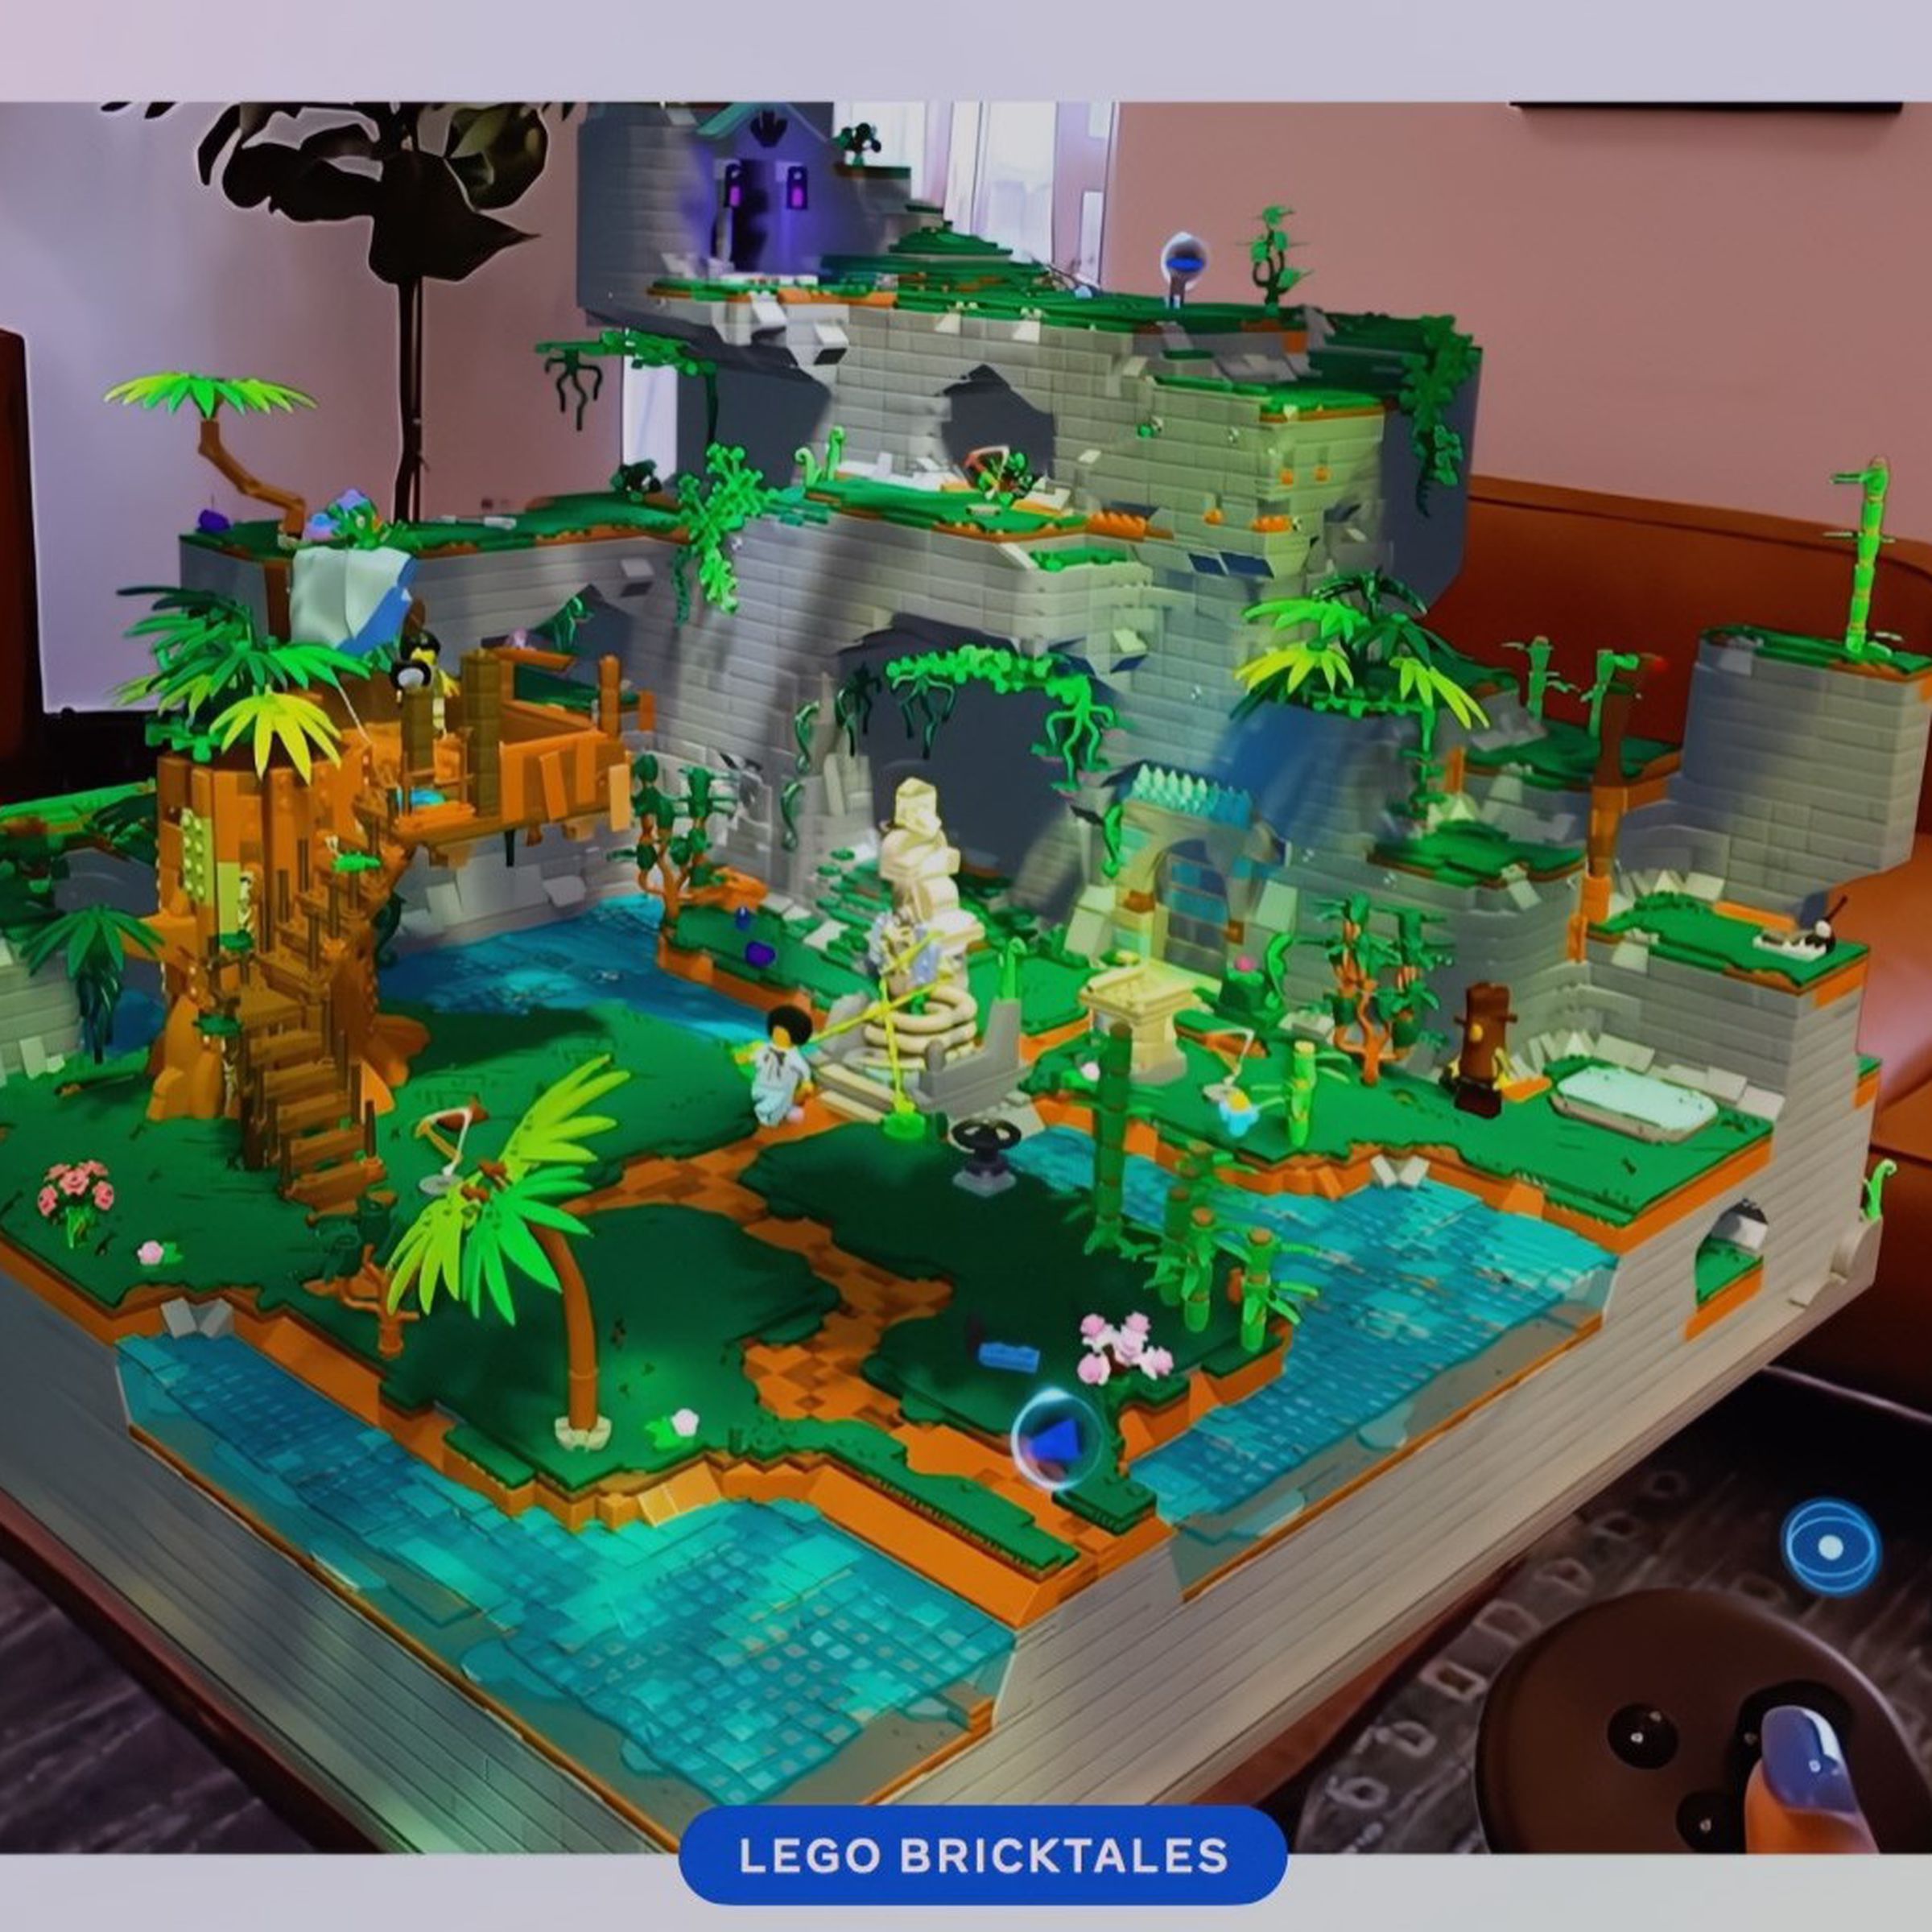 A virtual lego island paradise on a real-world living room table, with a couch in the background